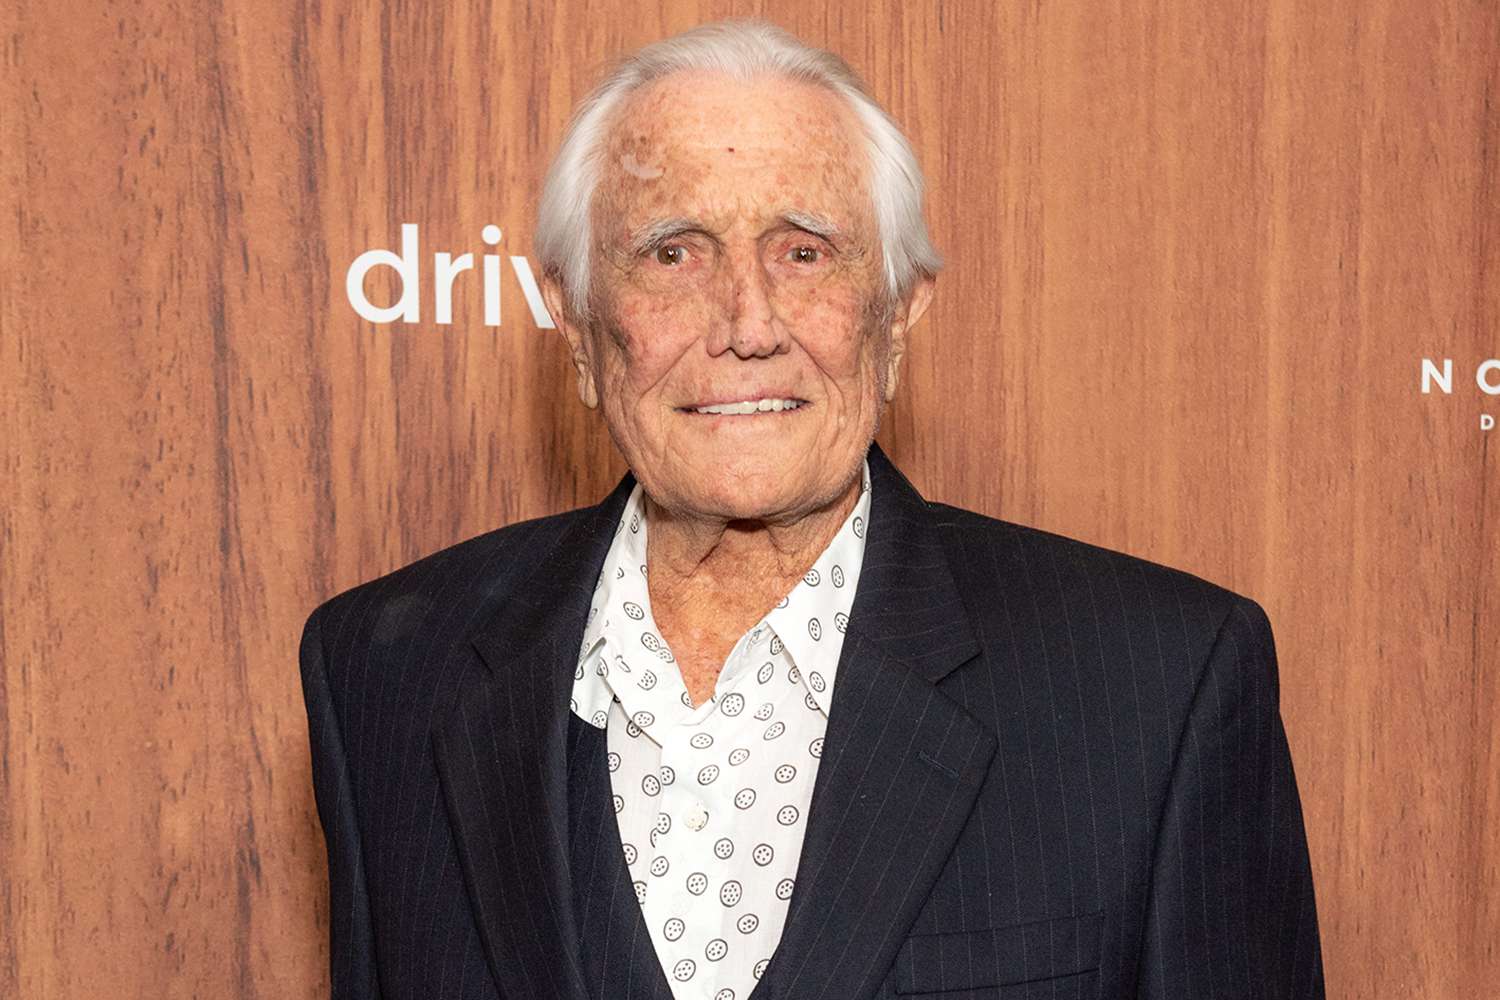 Former James Bond Star George Lazenby Announces Retirement from Acting [Video]